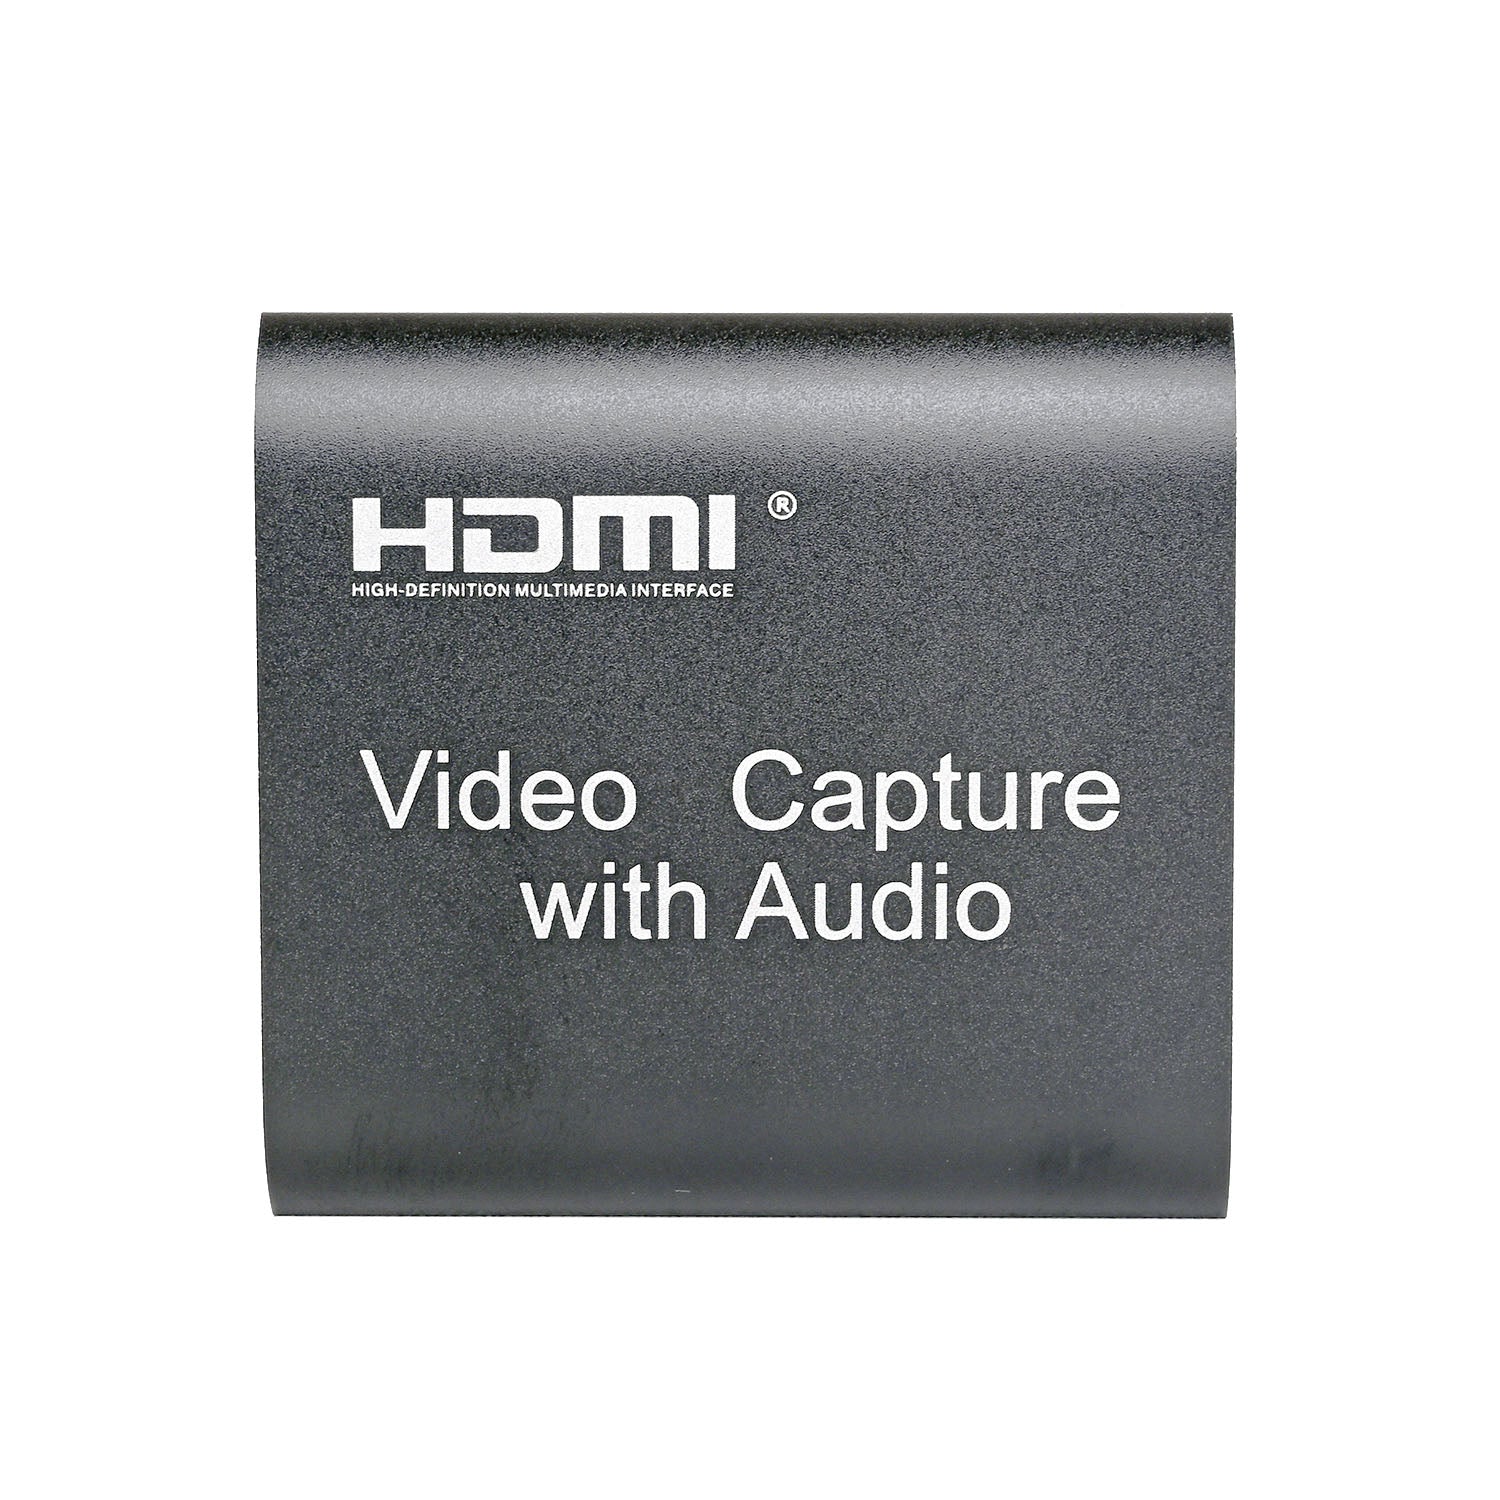 HDMI Video Capture with Audio USB 3.0